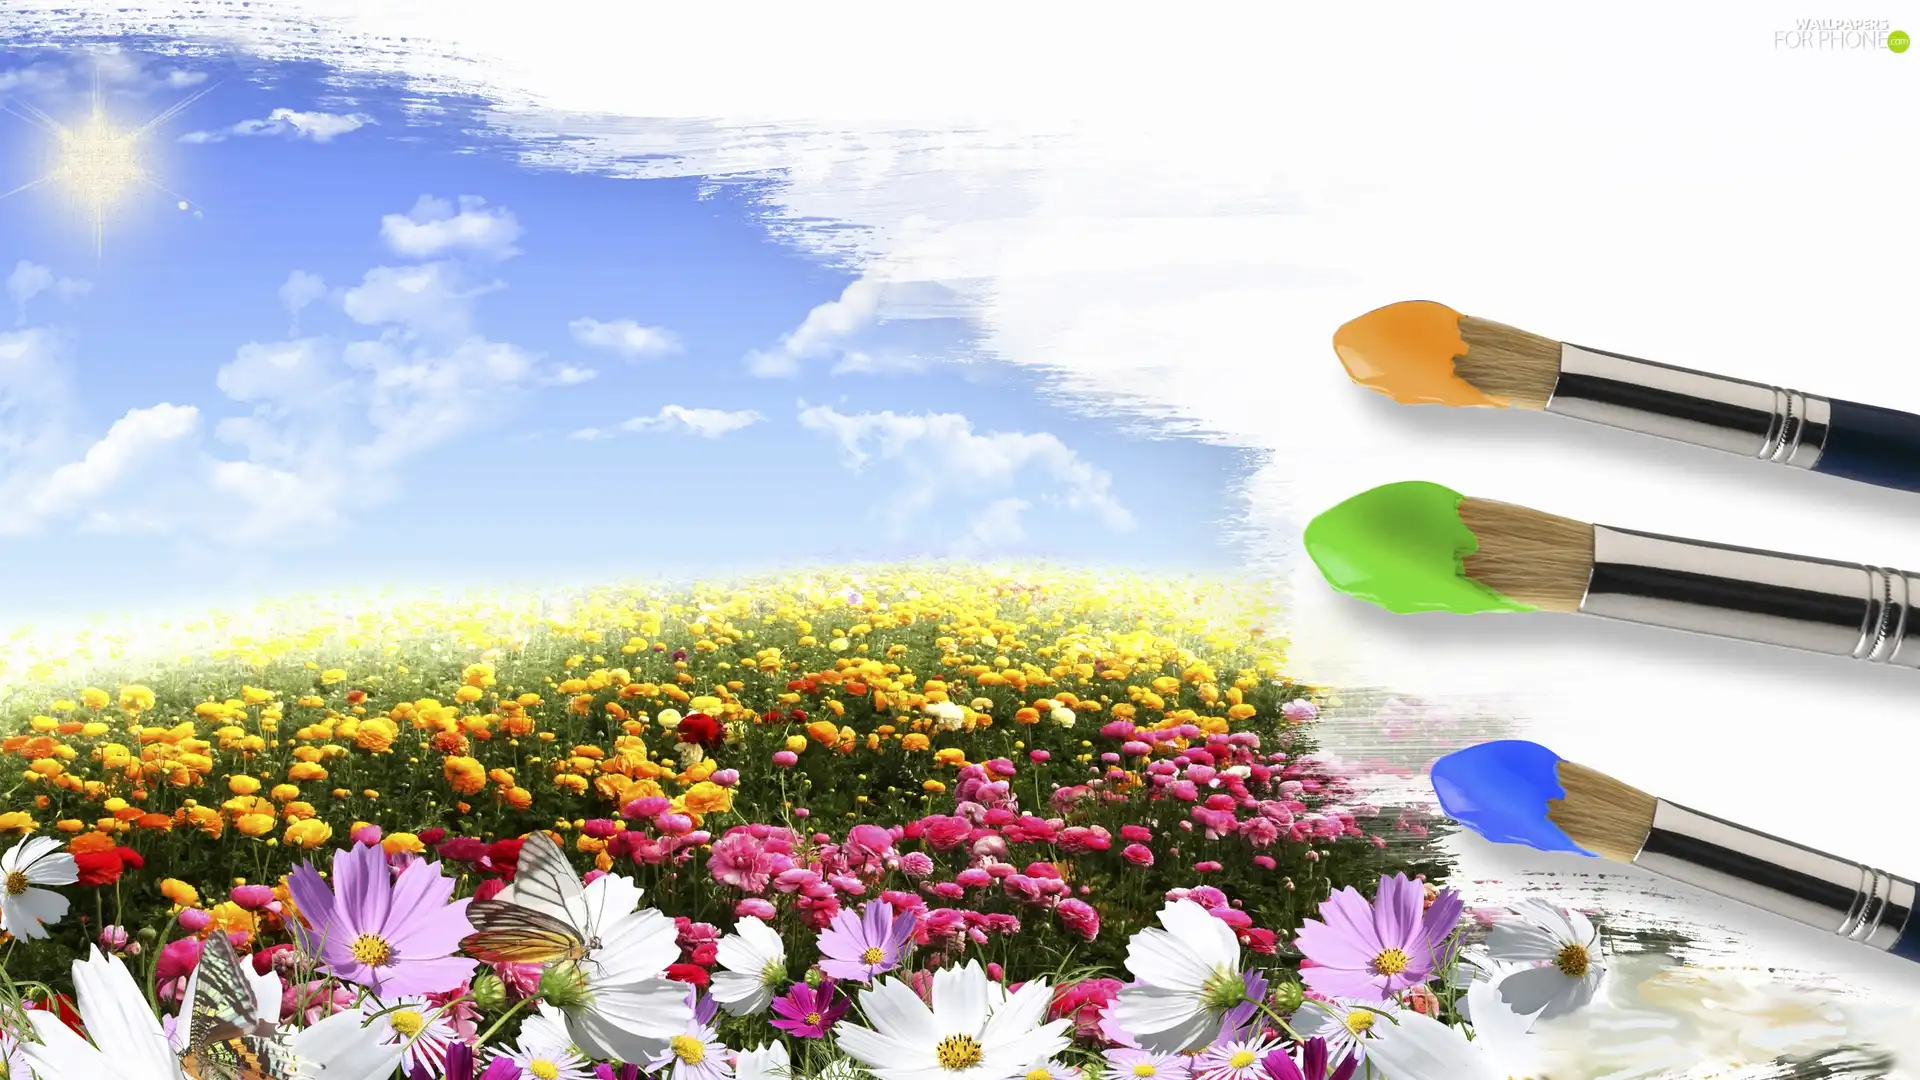 Meadow, Flowers, Sky, clouds, Brushes